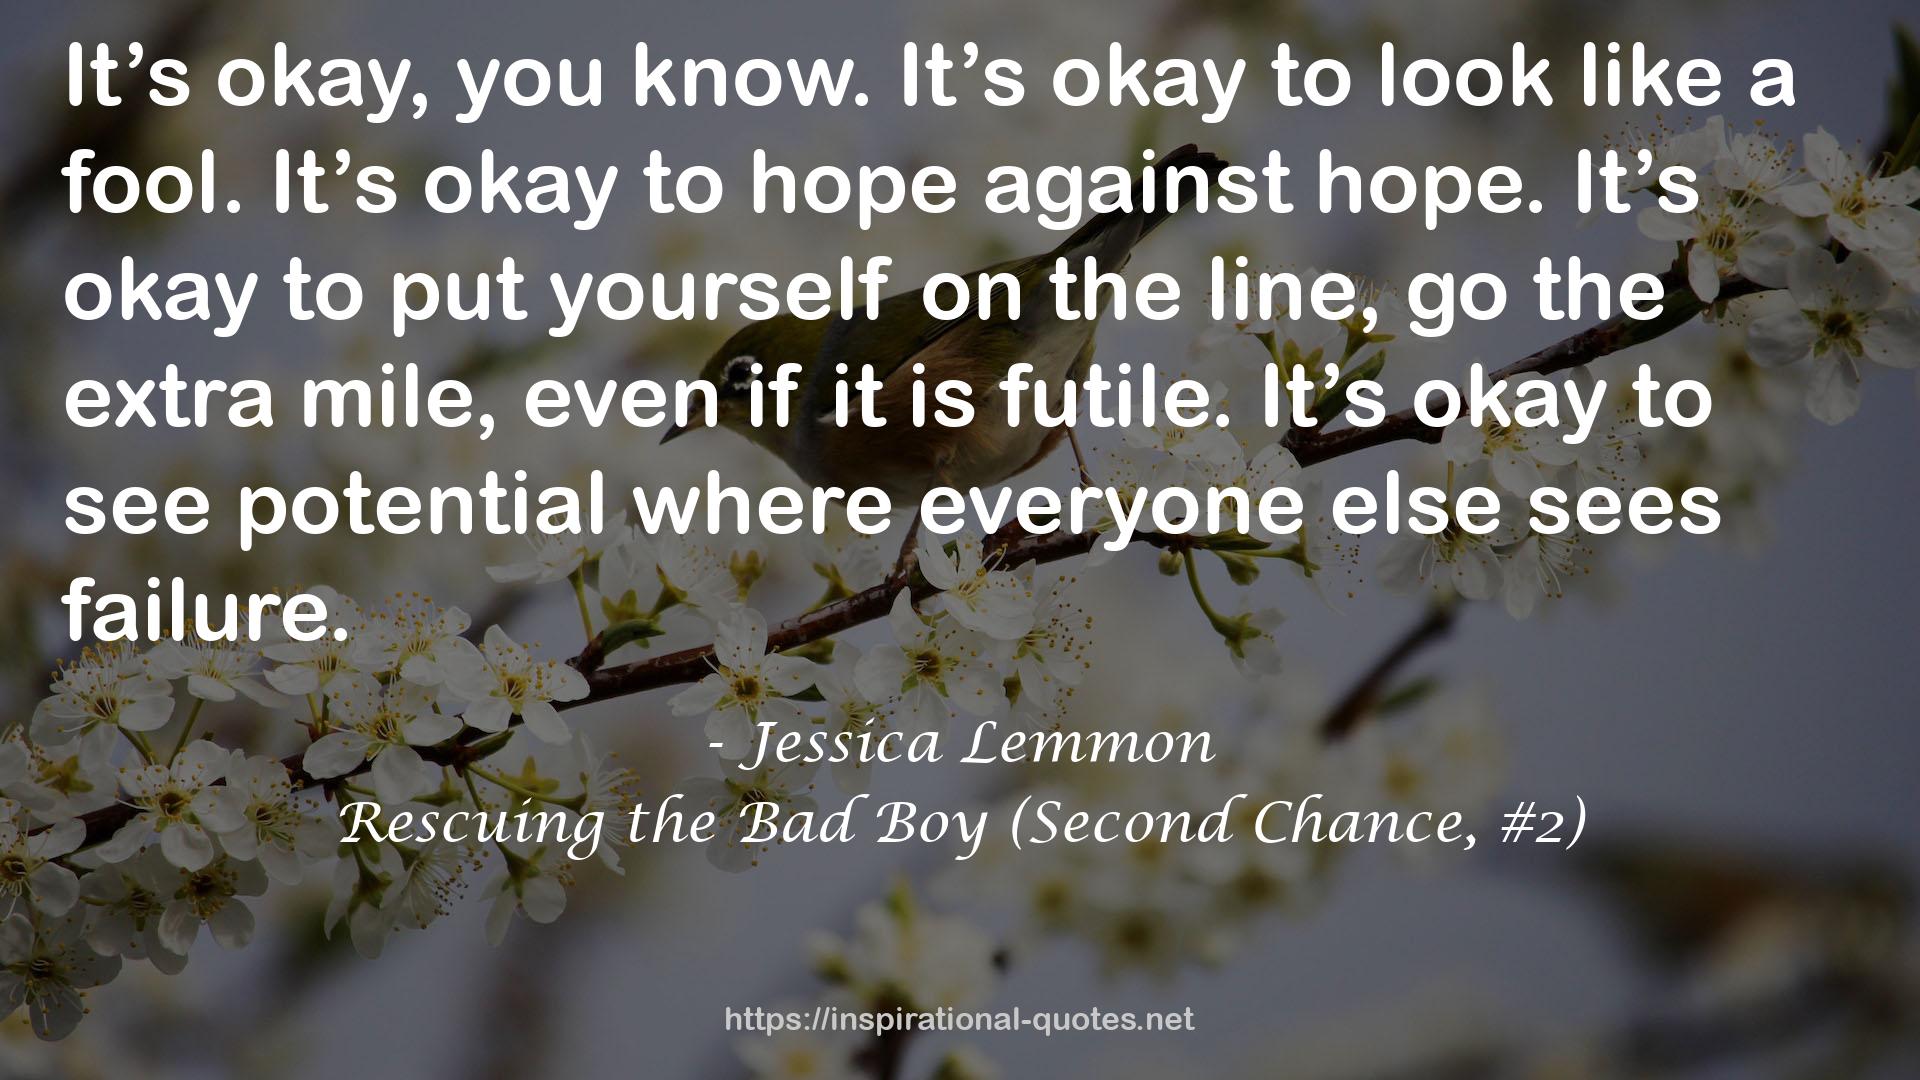 Rescuing the Bad Boy (Second Chance, #2) QUOTES